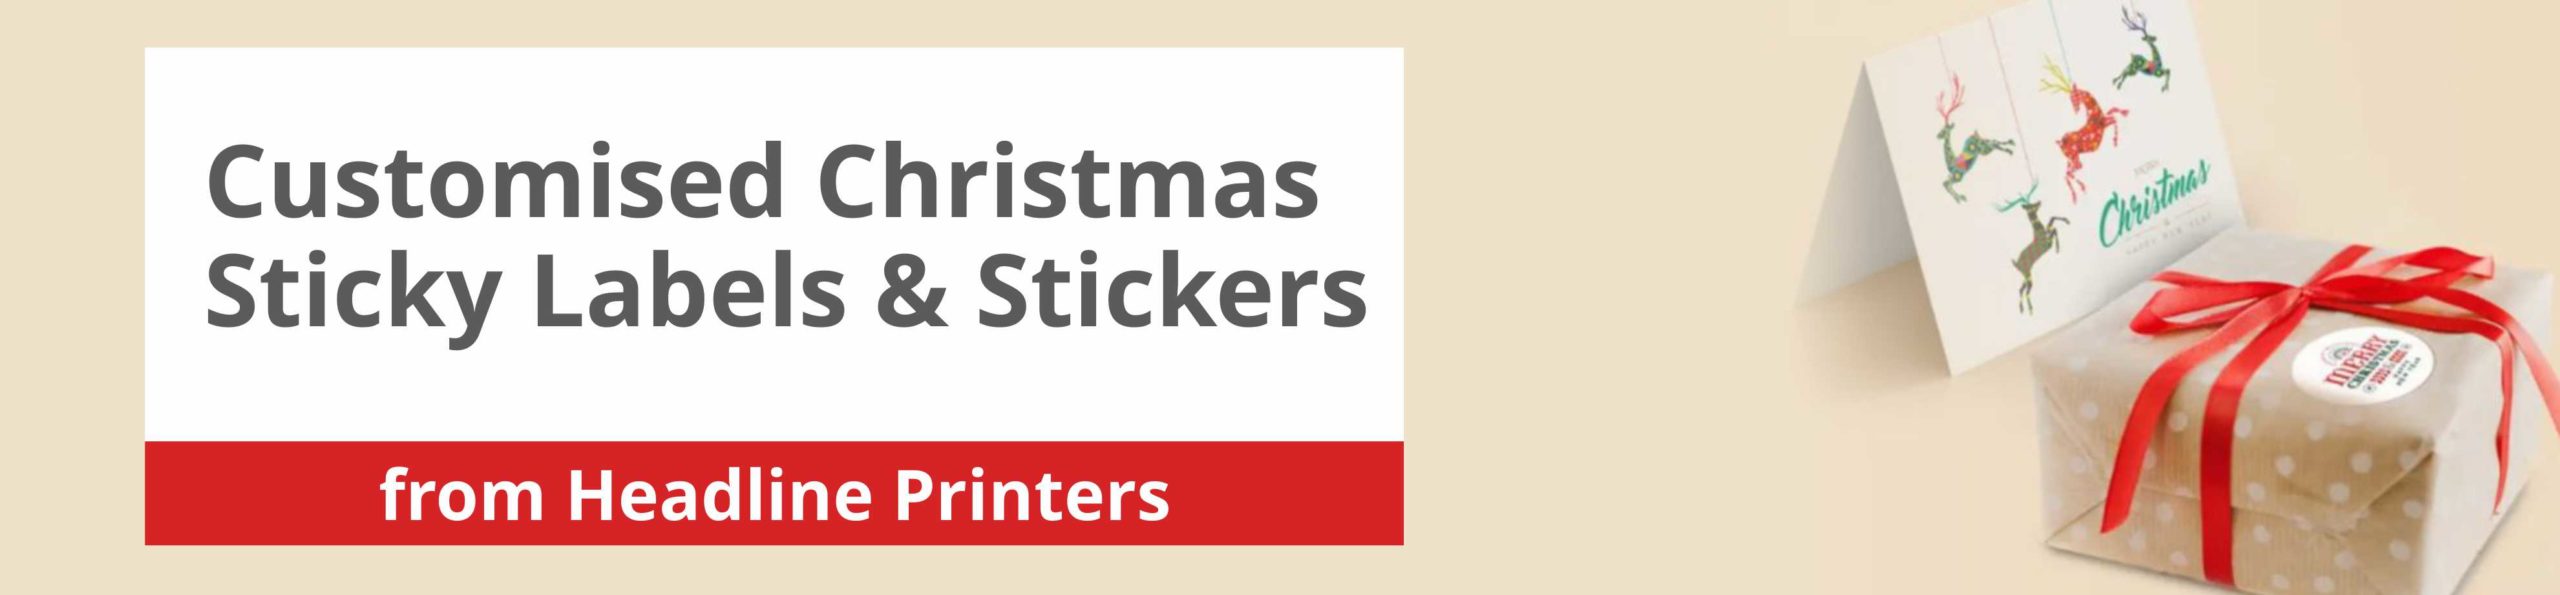 Customised Christmas Sticky Labels & Stickers